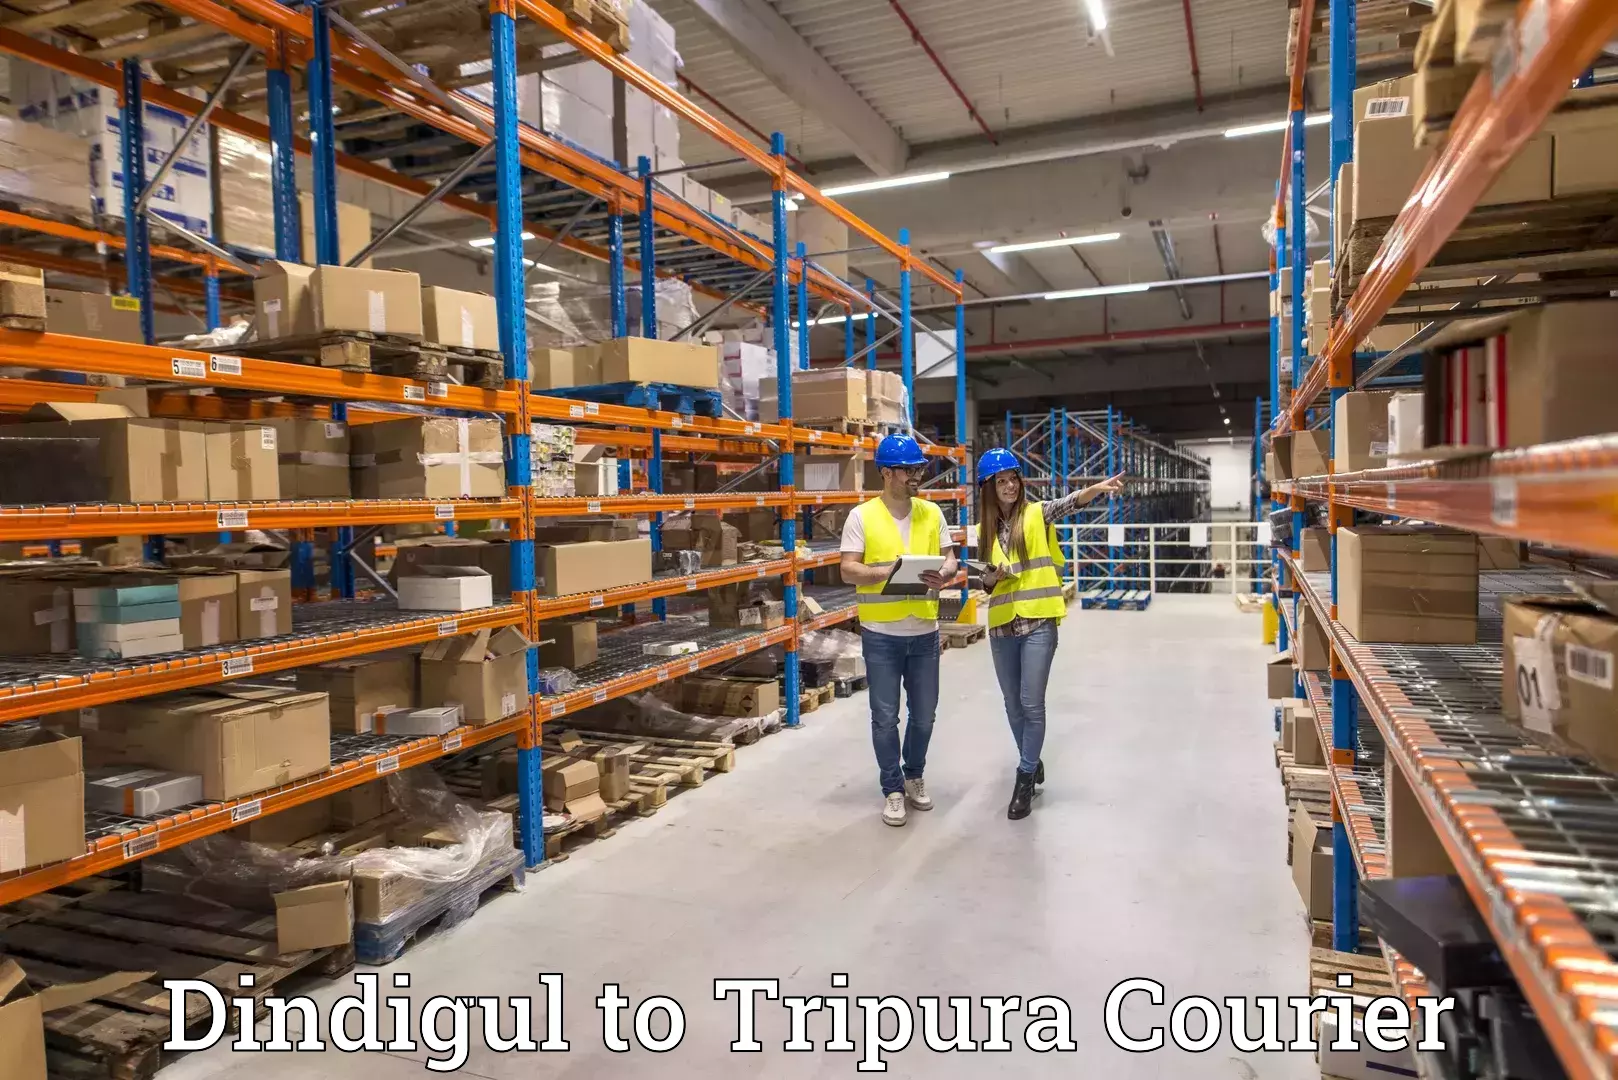 Courier service innovation Dindigul to Tripura